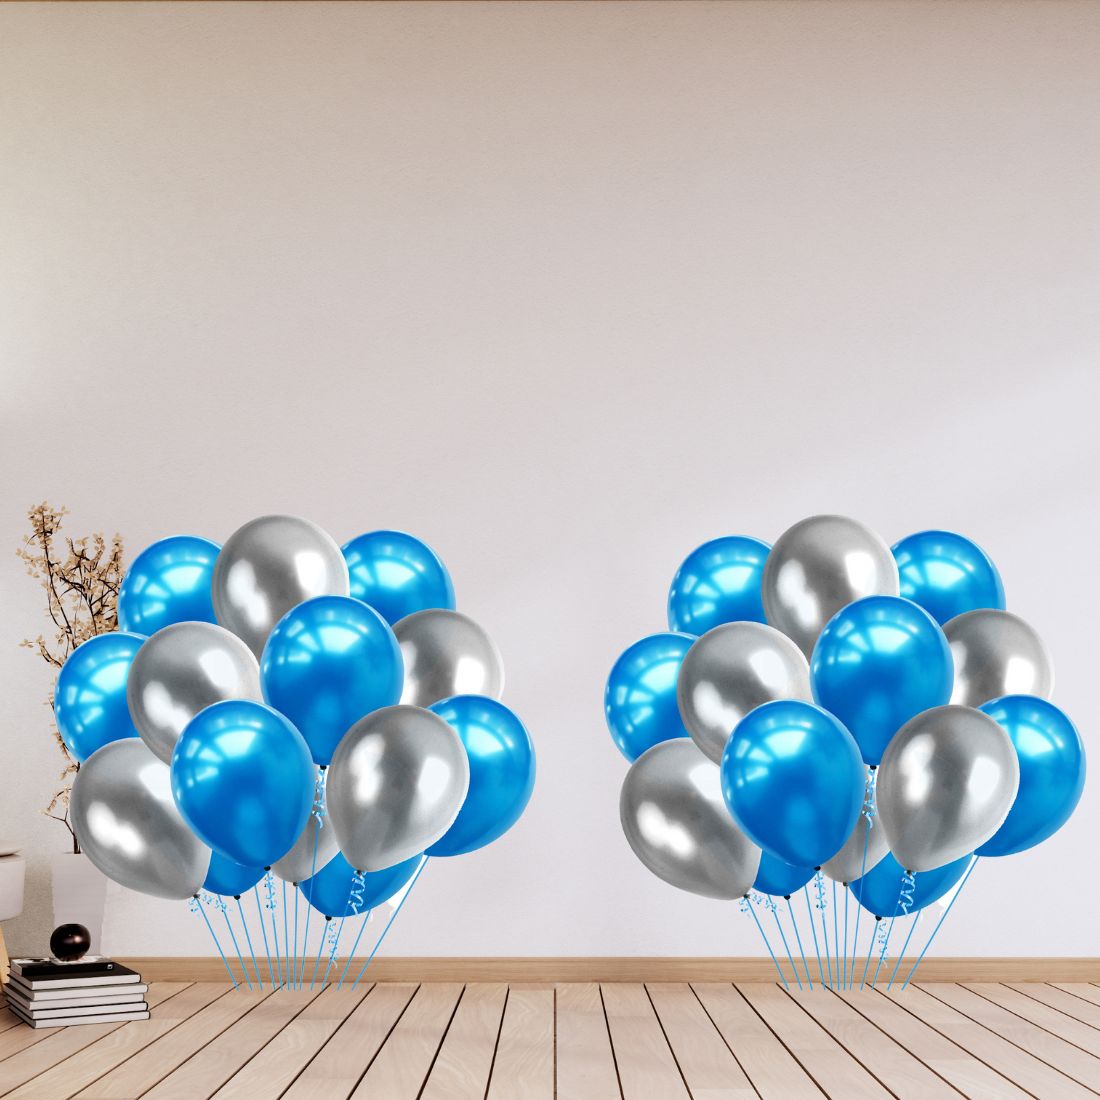 100 Blue And Silver Assorted Metallic Balloons For Baby-Bridal Shower, Birthday And Wedding Party Decoration